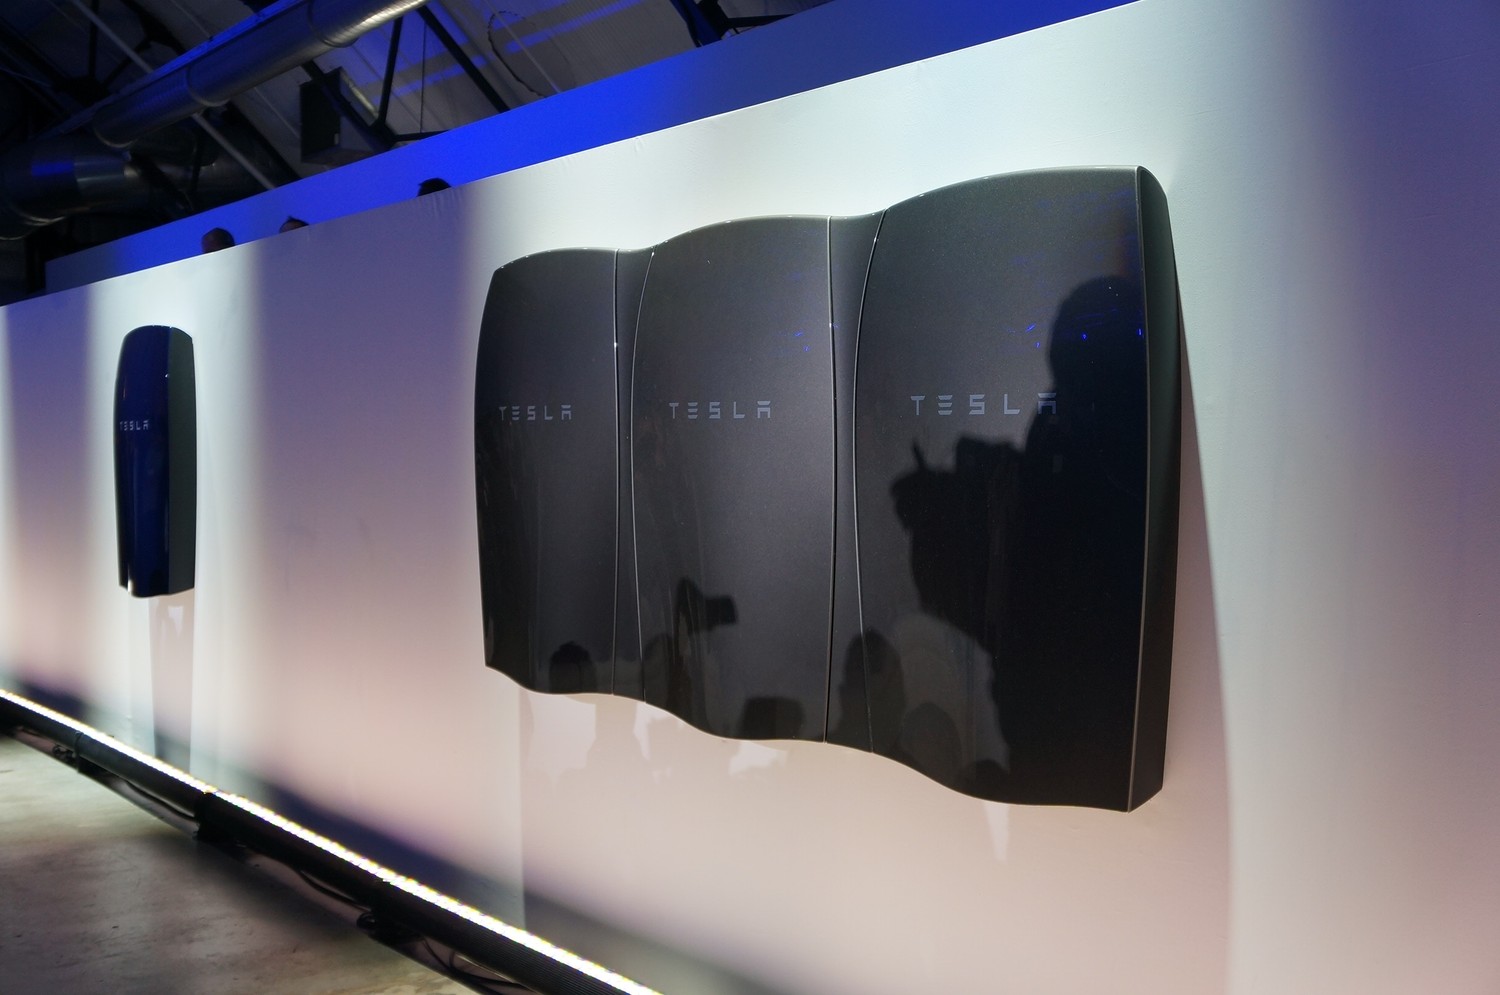 Tesla Powerwall: The future has arrived